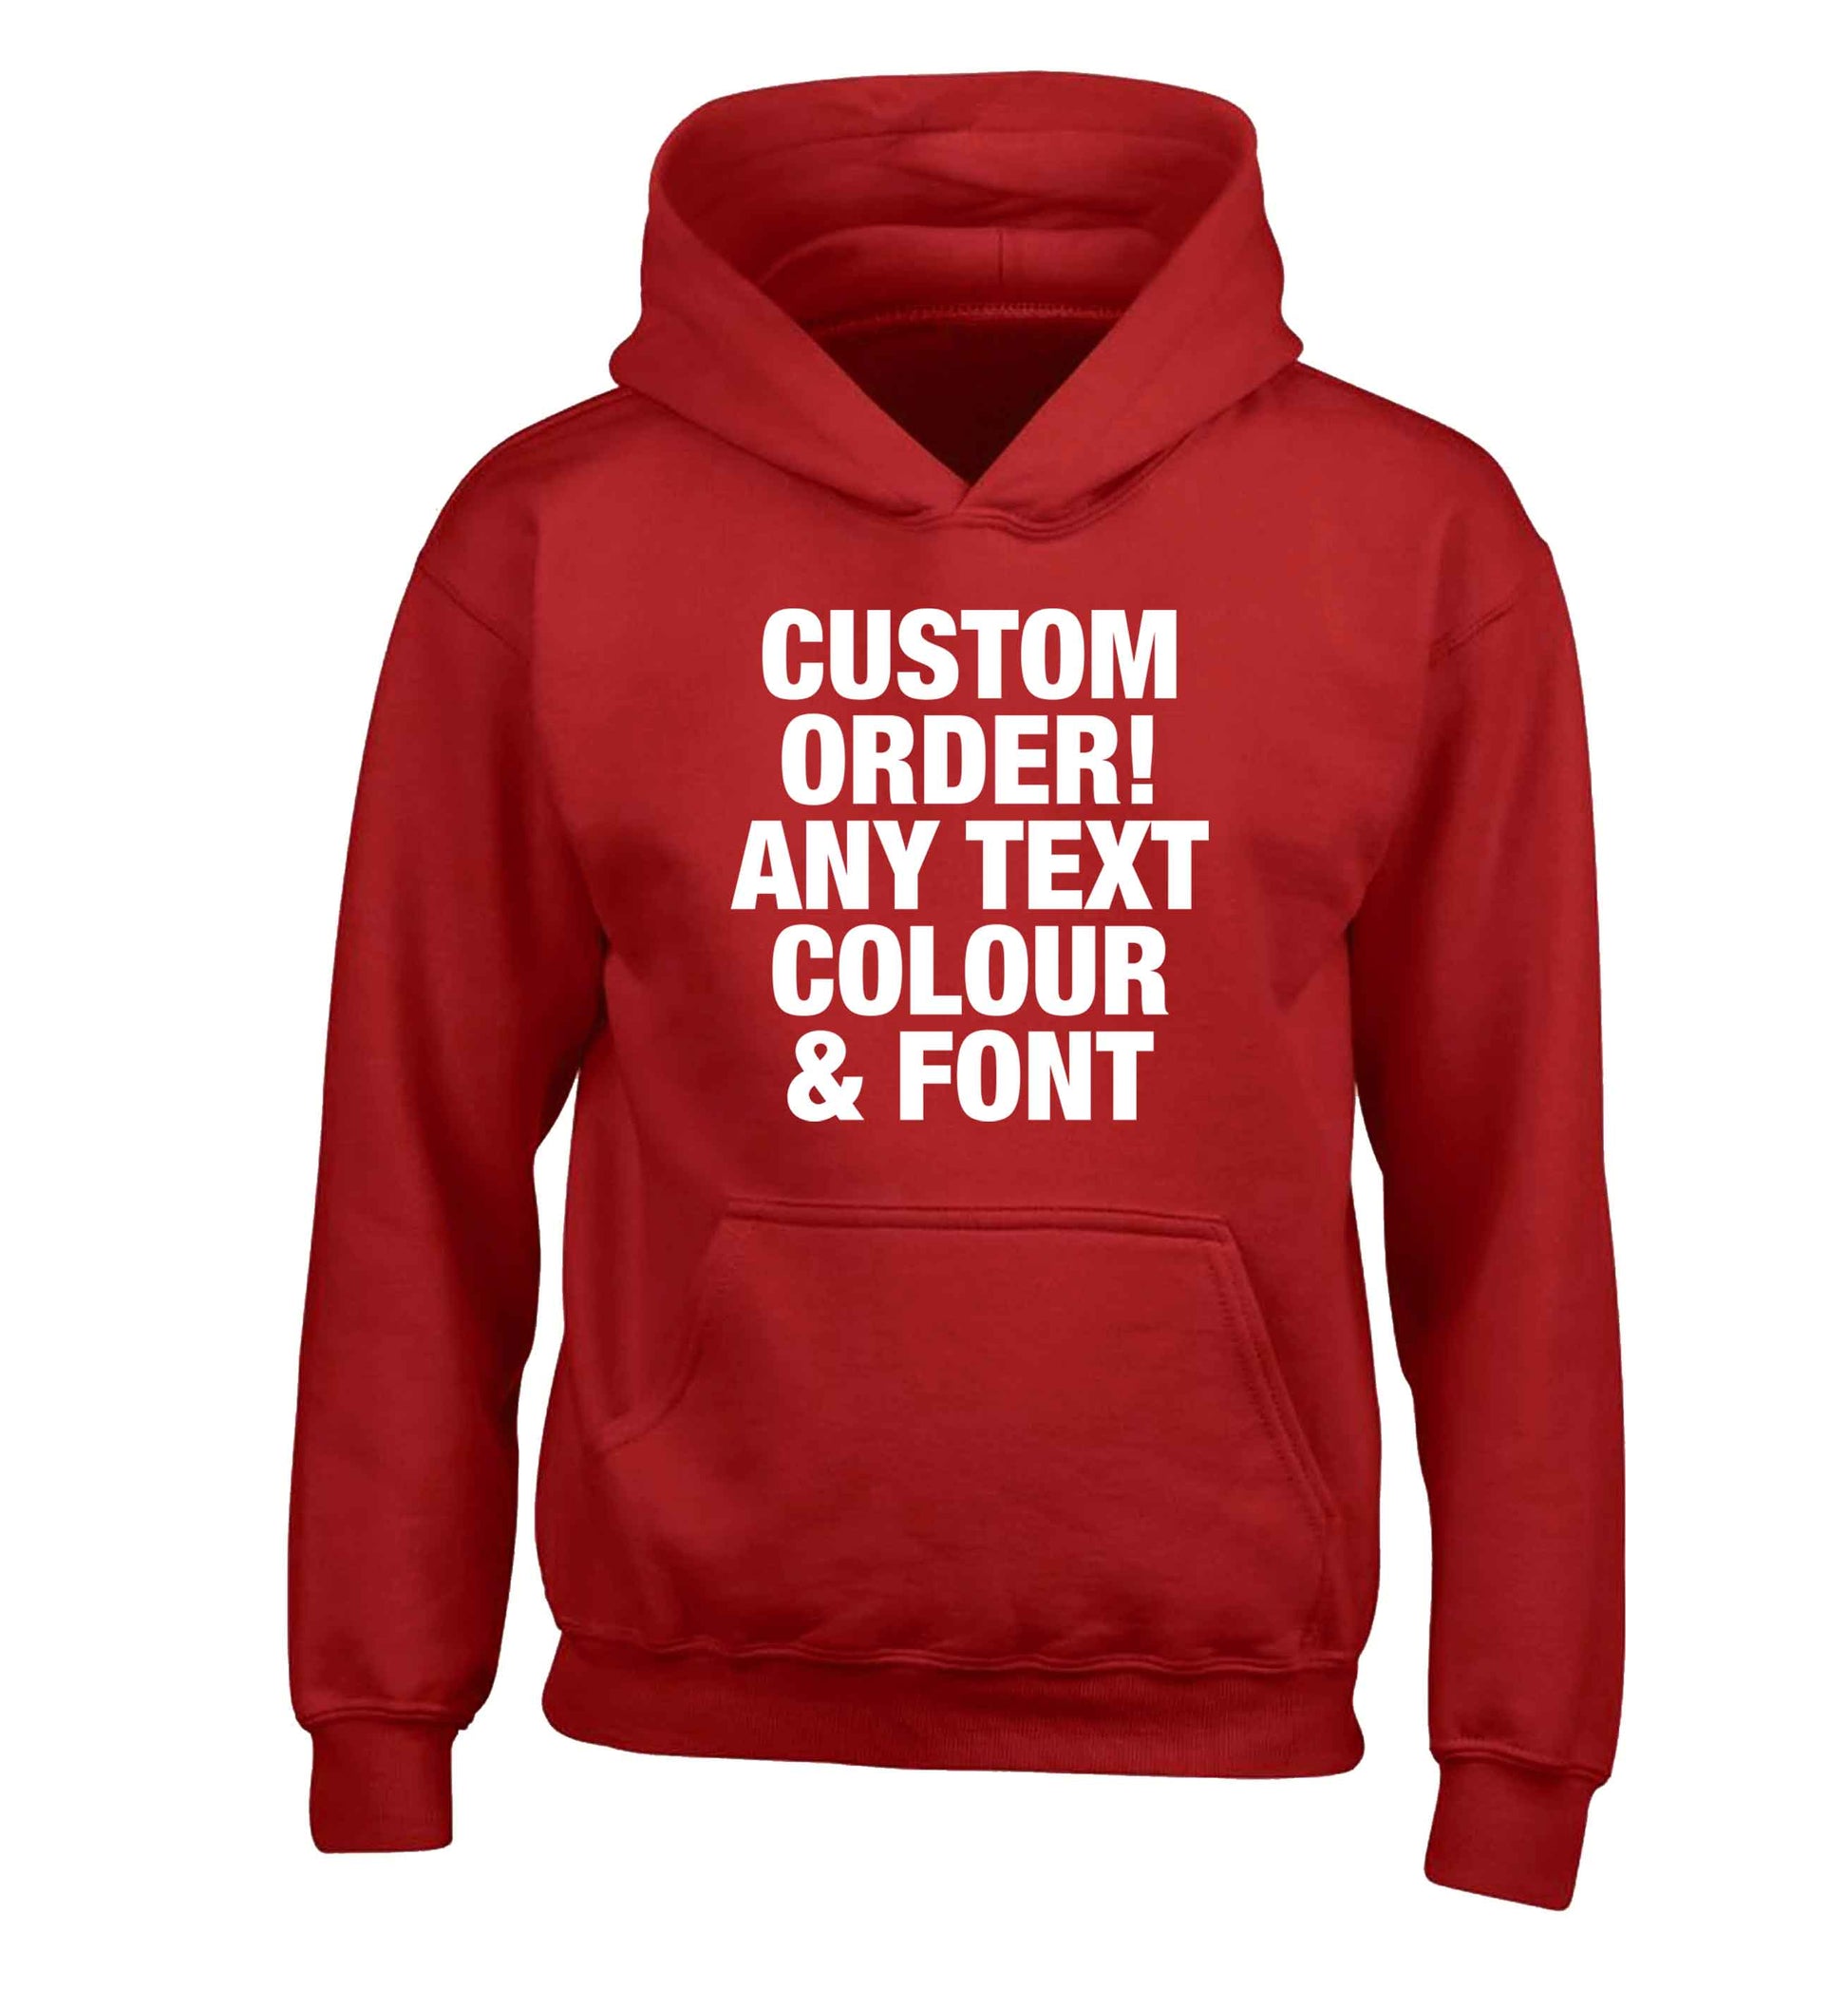 Custom order any text colour and font children's red hoodie 12-13 Years